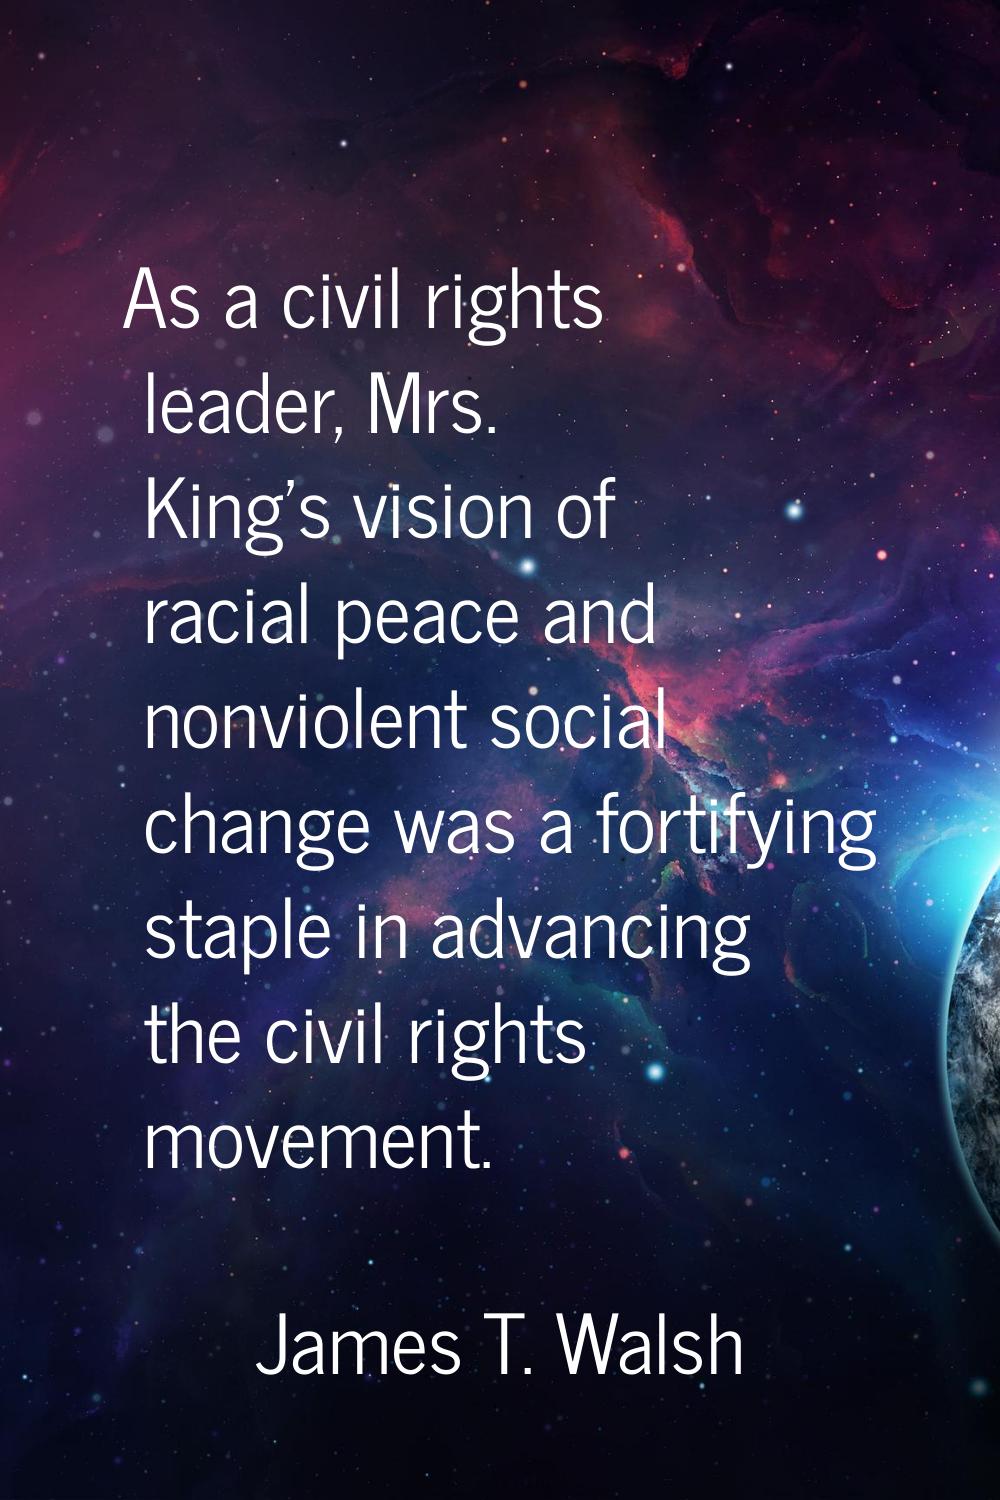 As a civil rights leader, Mrs. King's vision of racial peace and nonviolent social change was a for